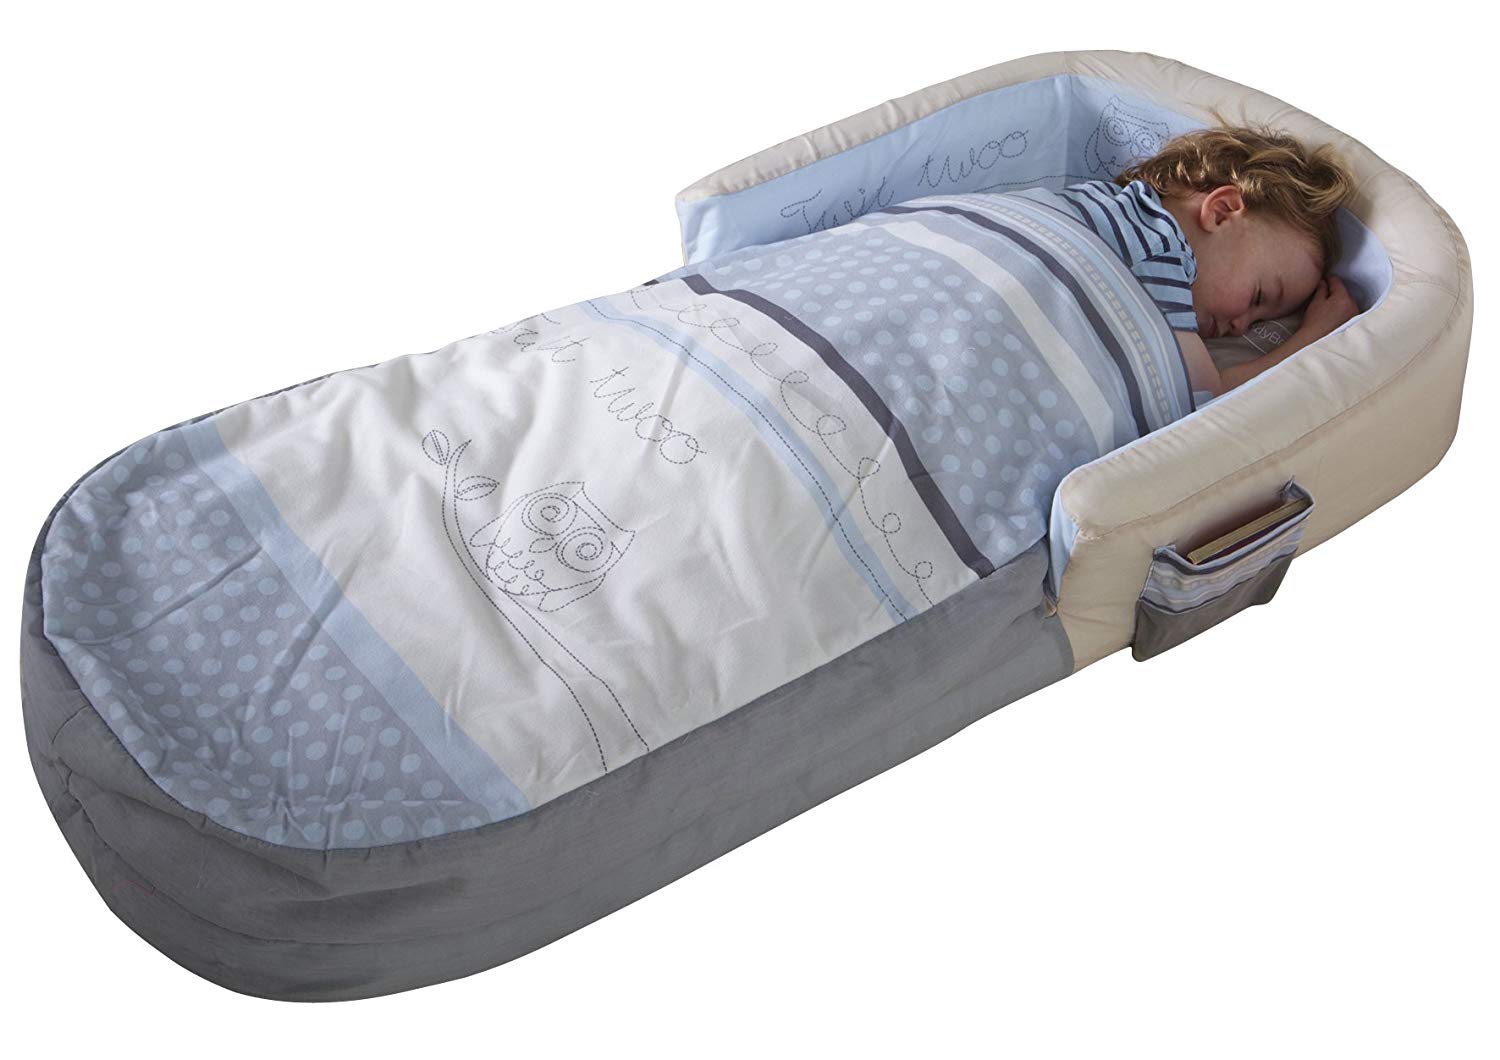 sleeping bag with mattress built in for kids